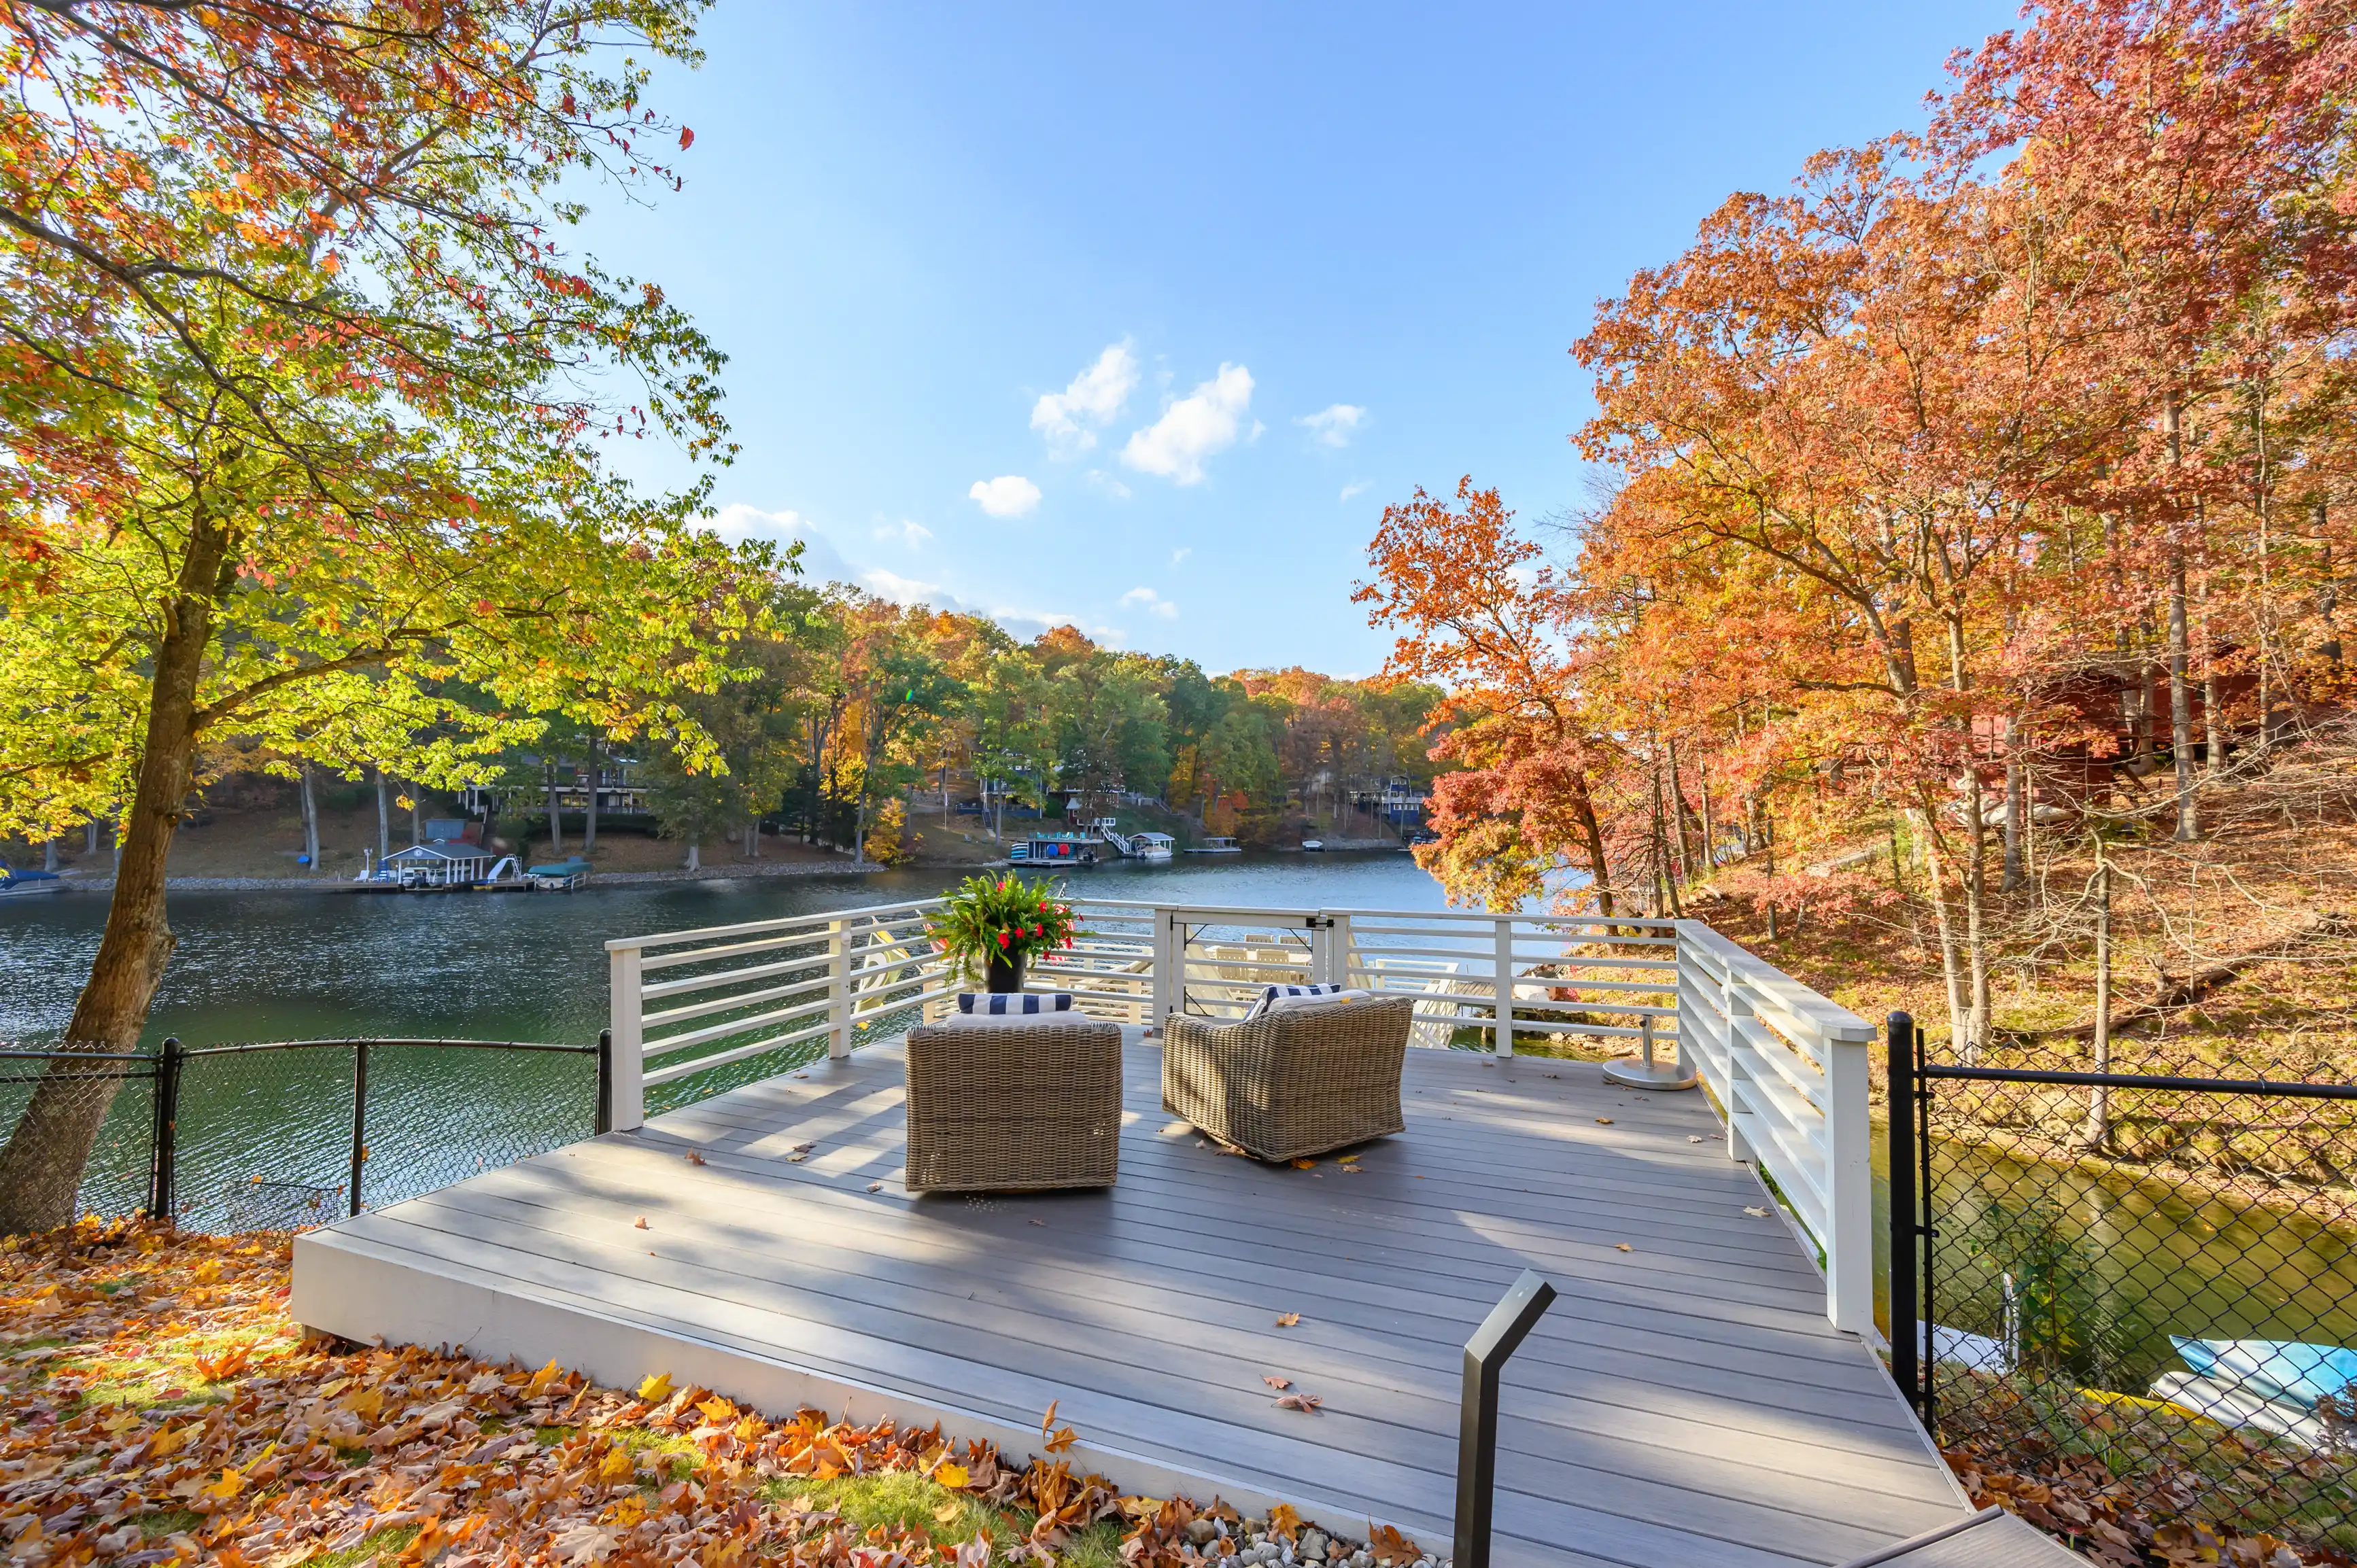 Autumnal view from a lakeside deck with colorful foliage, outdoor furniture, and boats on the water.